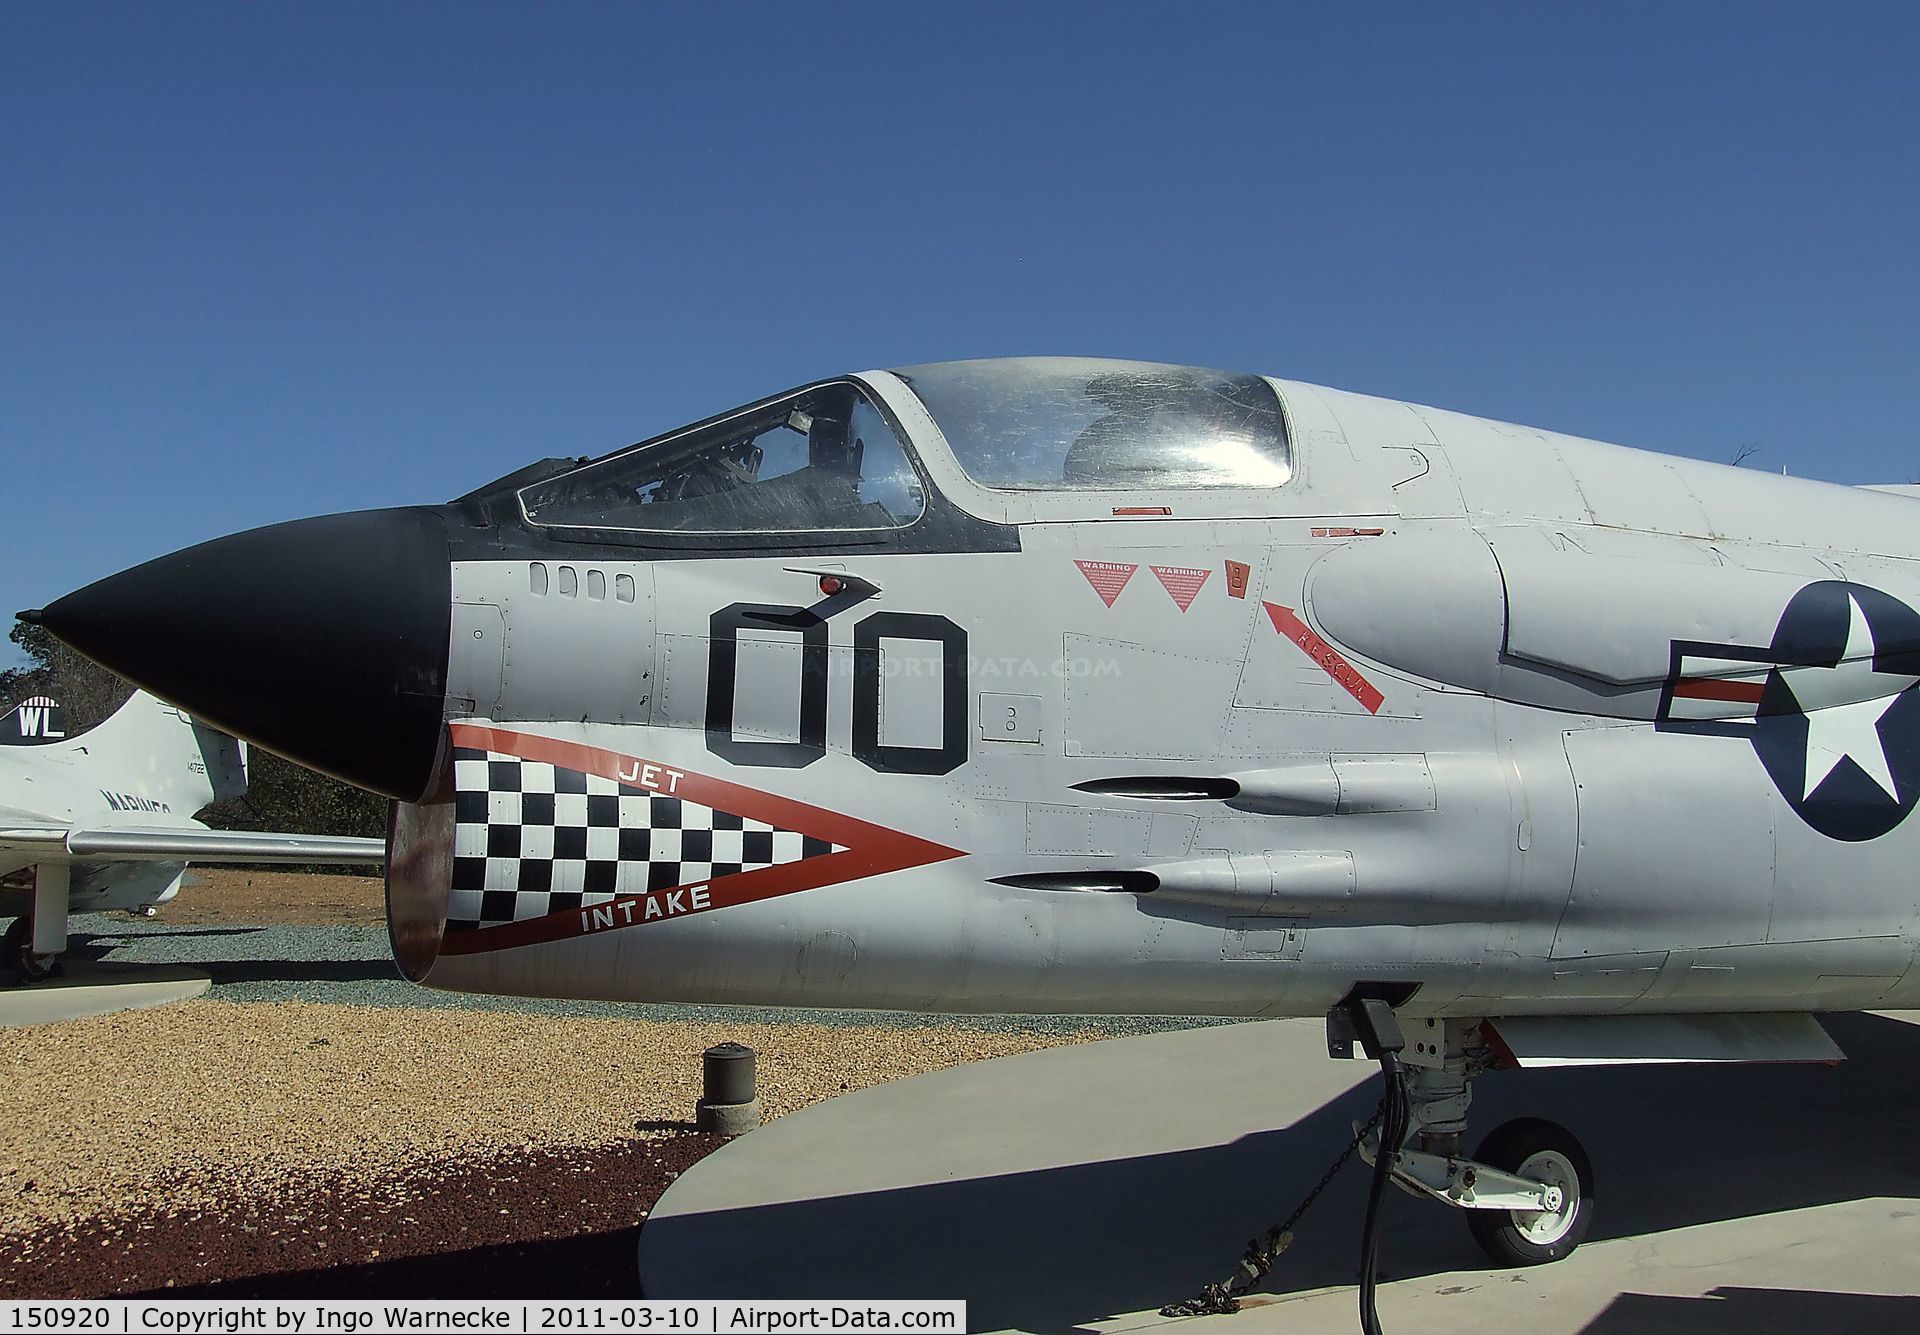 150920, Vought F-8E Crusader C/N 1205, Vought F-8E Crusader at the Flying Leatherneck Aviation Museum, Miramar CA